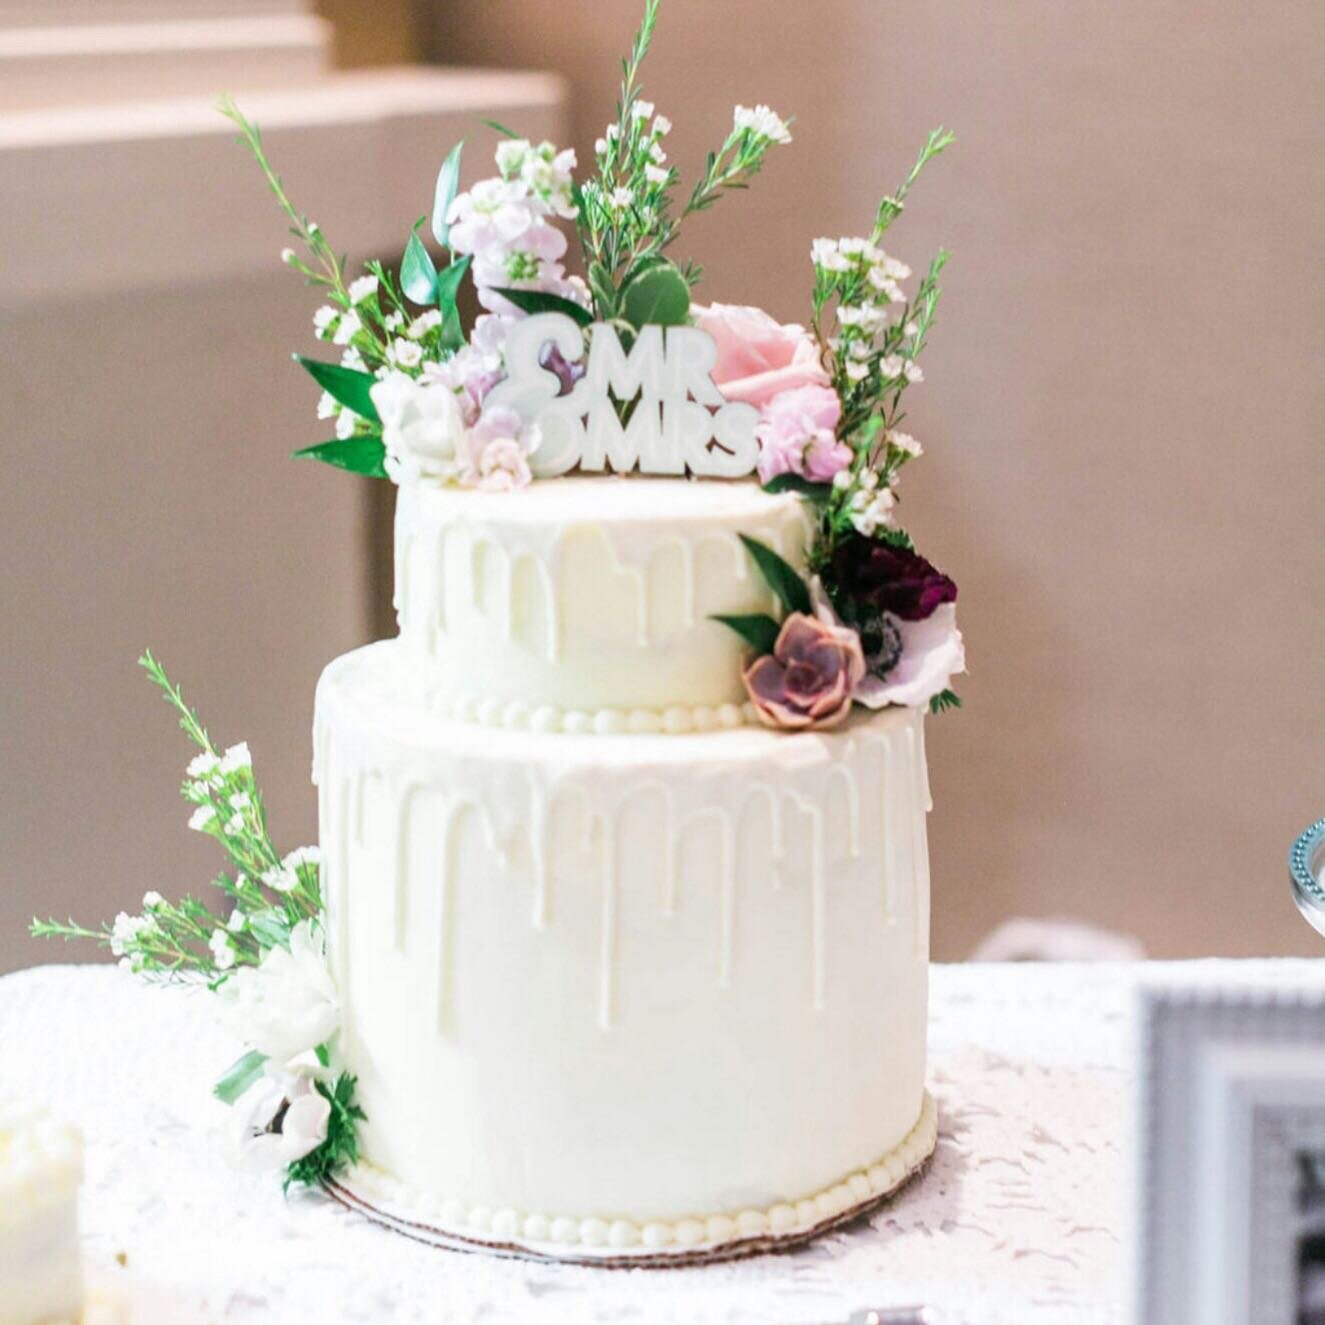 Is it just me or do cakes look even more appetizing with fresh flowers on it?!?
.
.
.
 #dfwflorist #dfwweddings #dfwbride #dallasbride #fortworthbride #fortworthwedding #weddingcake